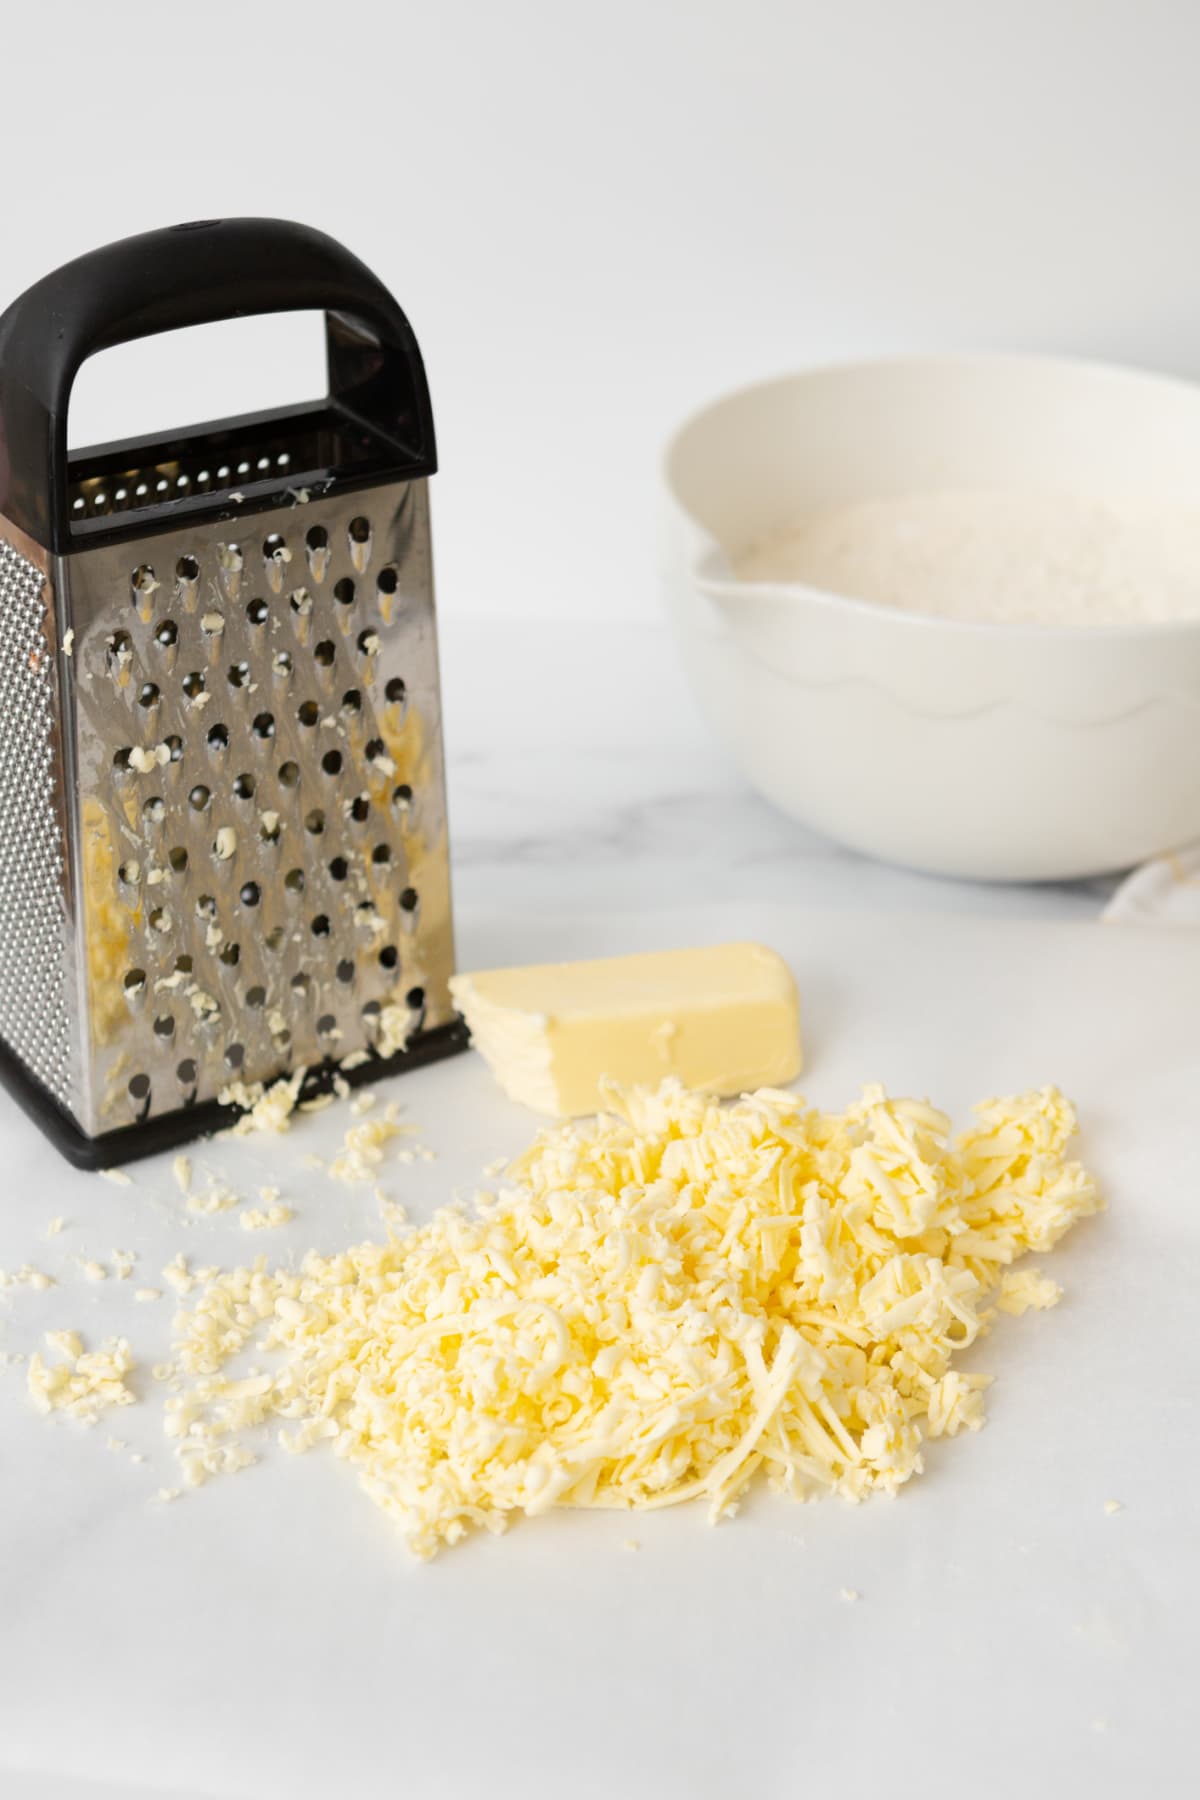 Japanese Contraption Grates Butter to Make It Easier to Spread